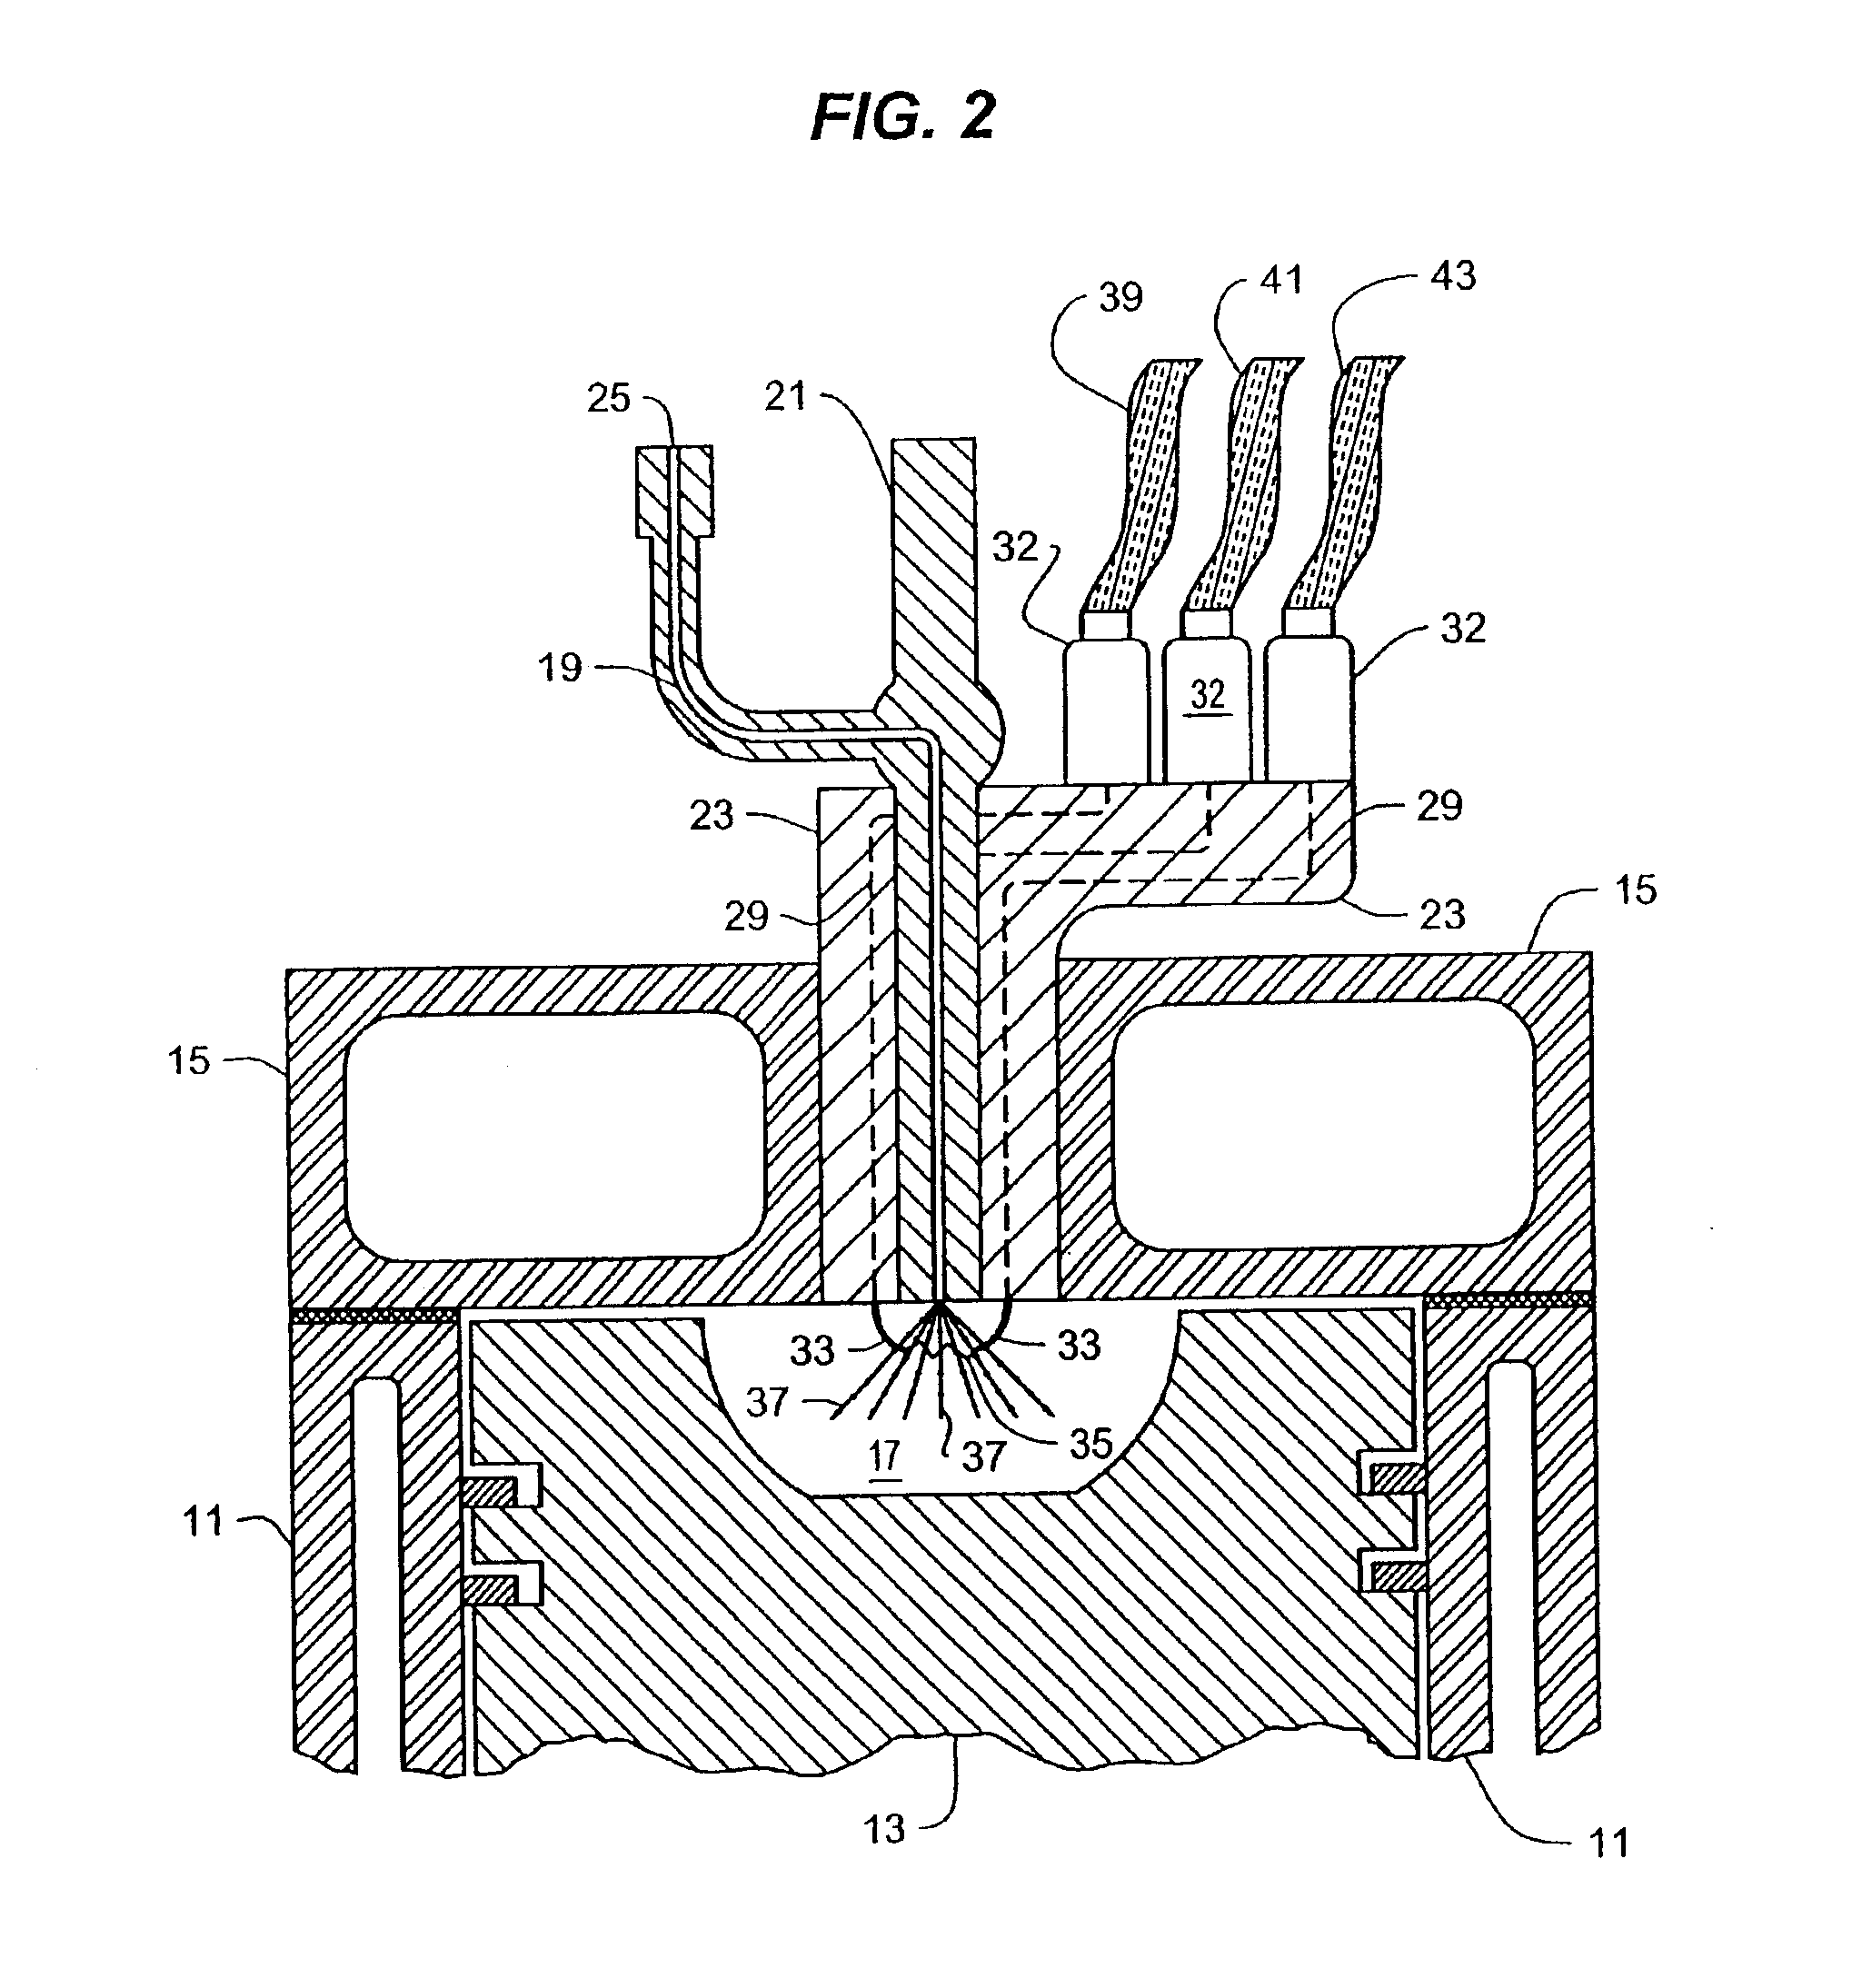 Plasma ignition for direct injected internal combustion engines